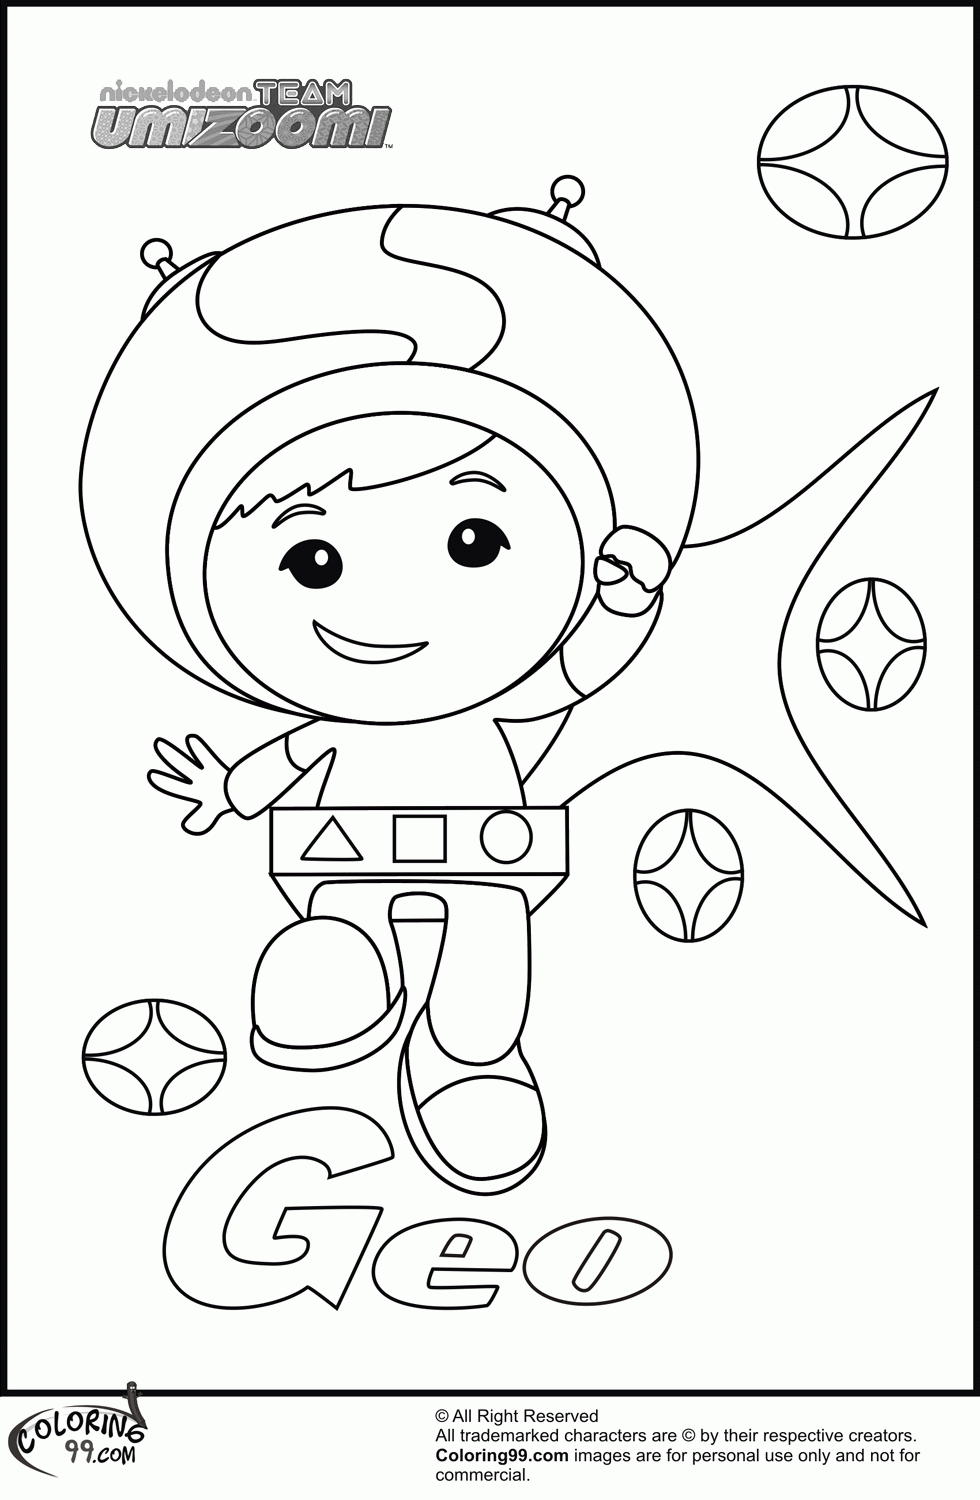 Team Umizoomi Coloring Pages | Team colors